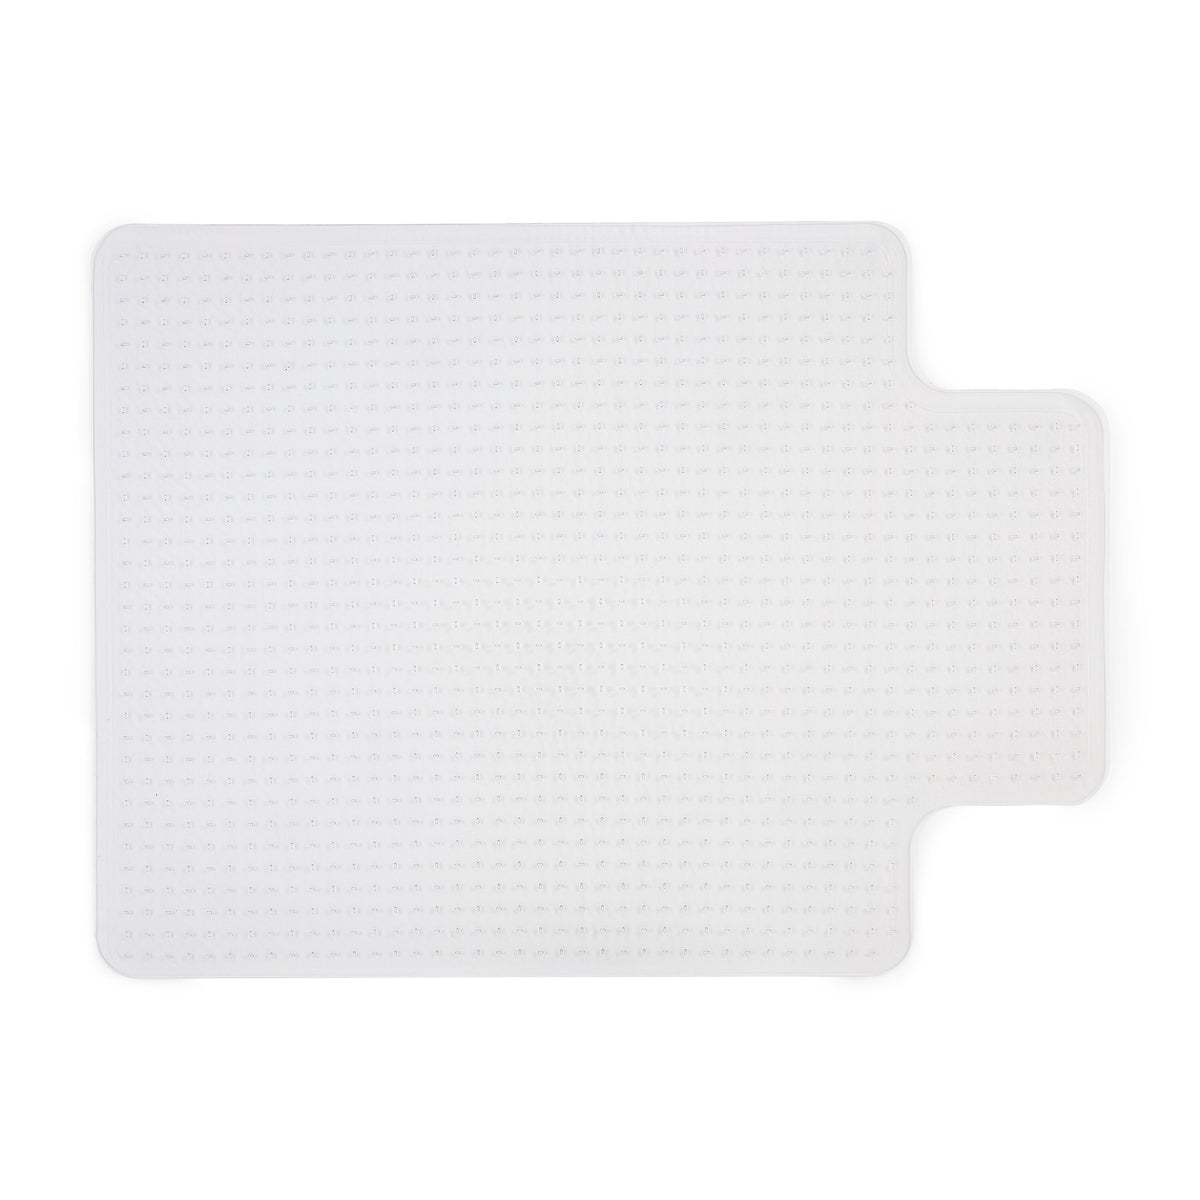 Staples®Carpet Chair Mat with Lip, 36" x 48'', Low-Pile, Clear